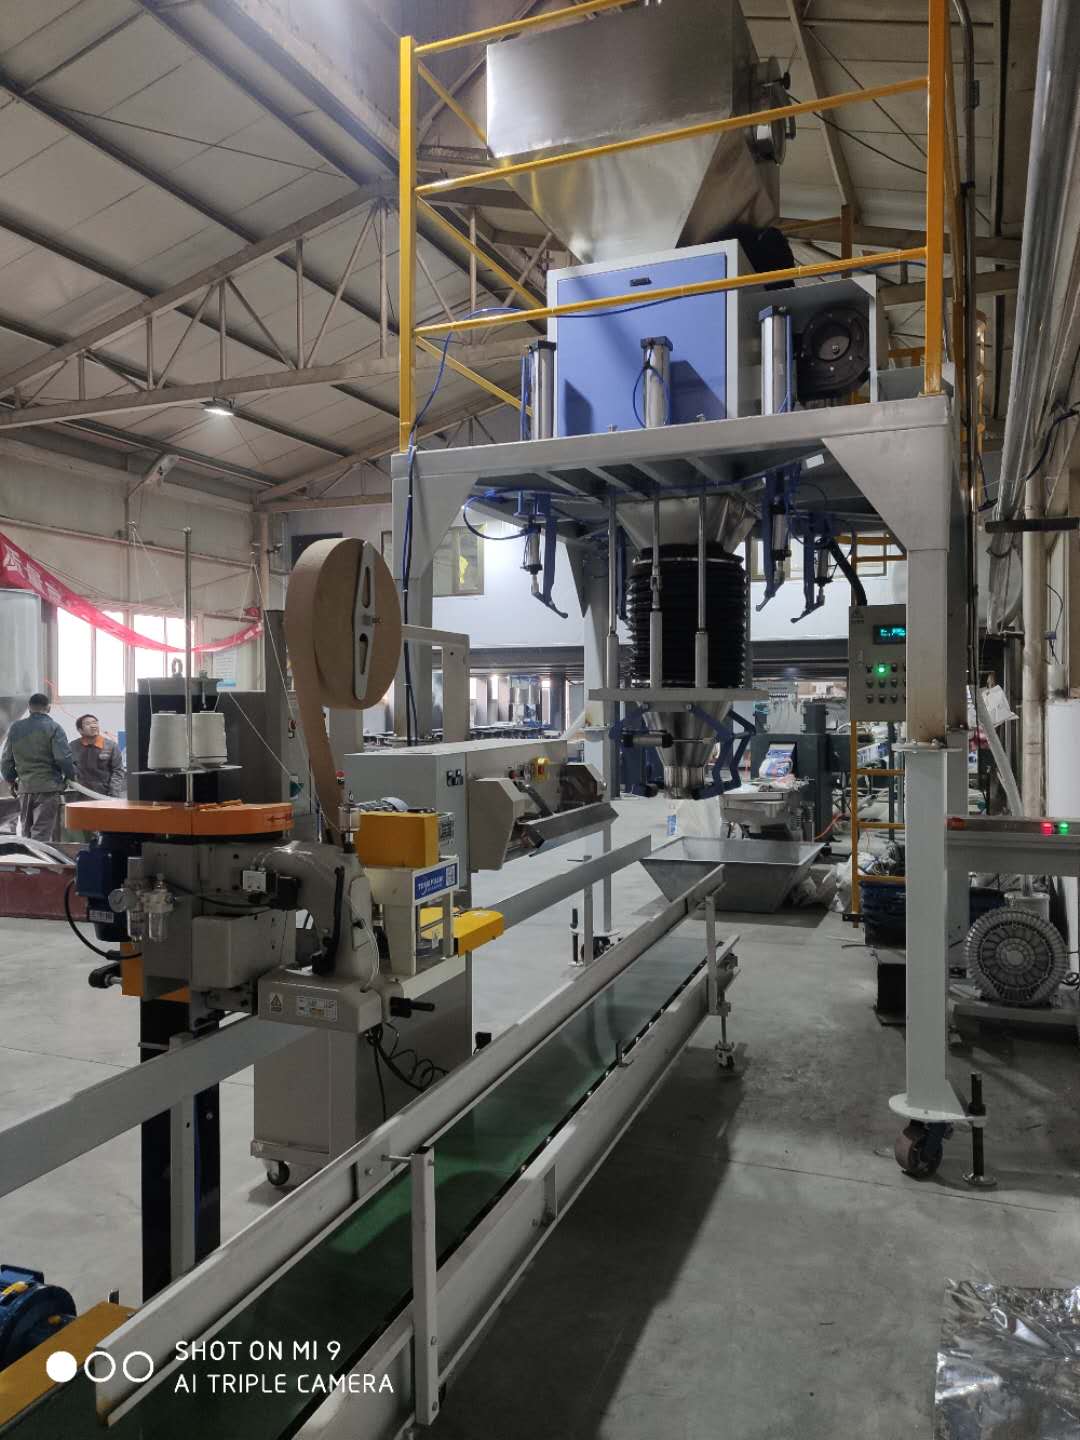 full automatic packing machine, automatic bagging, palletising and wrapping line, automated bagging machine and palletizing line, containerised bagging system, containerised weighing and bagging machi